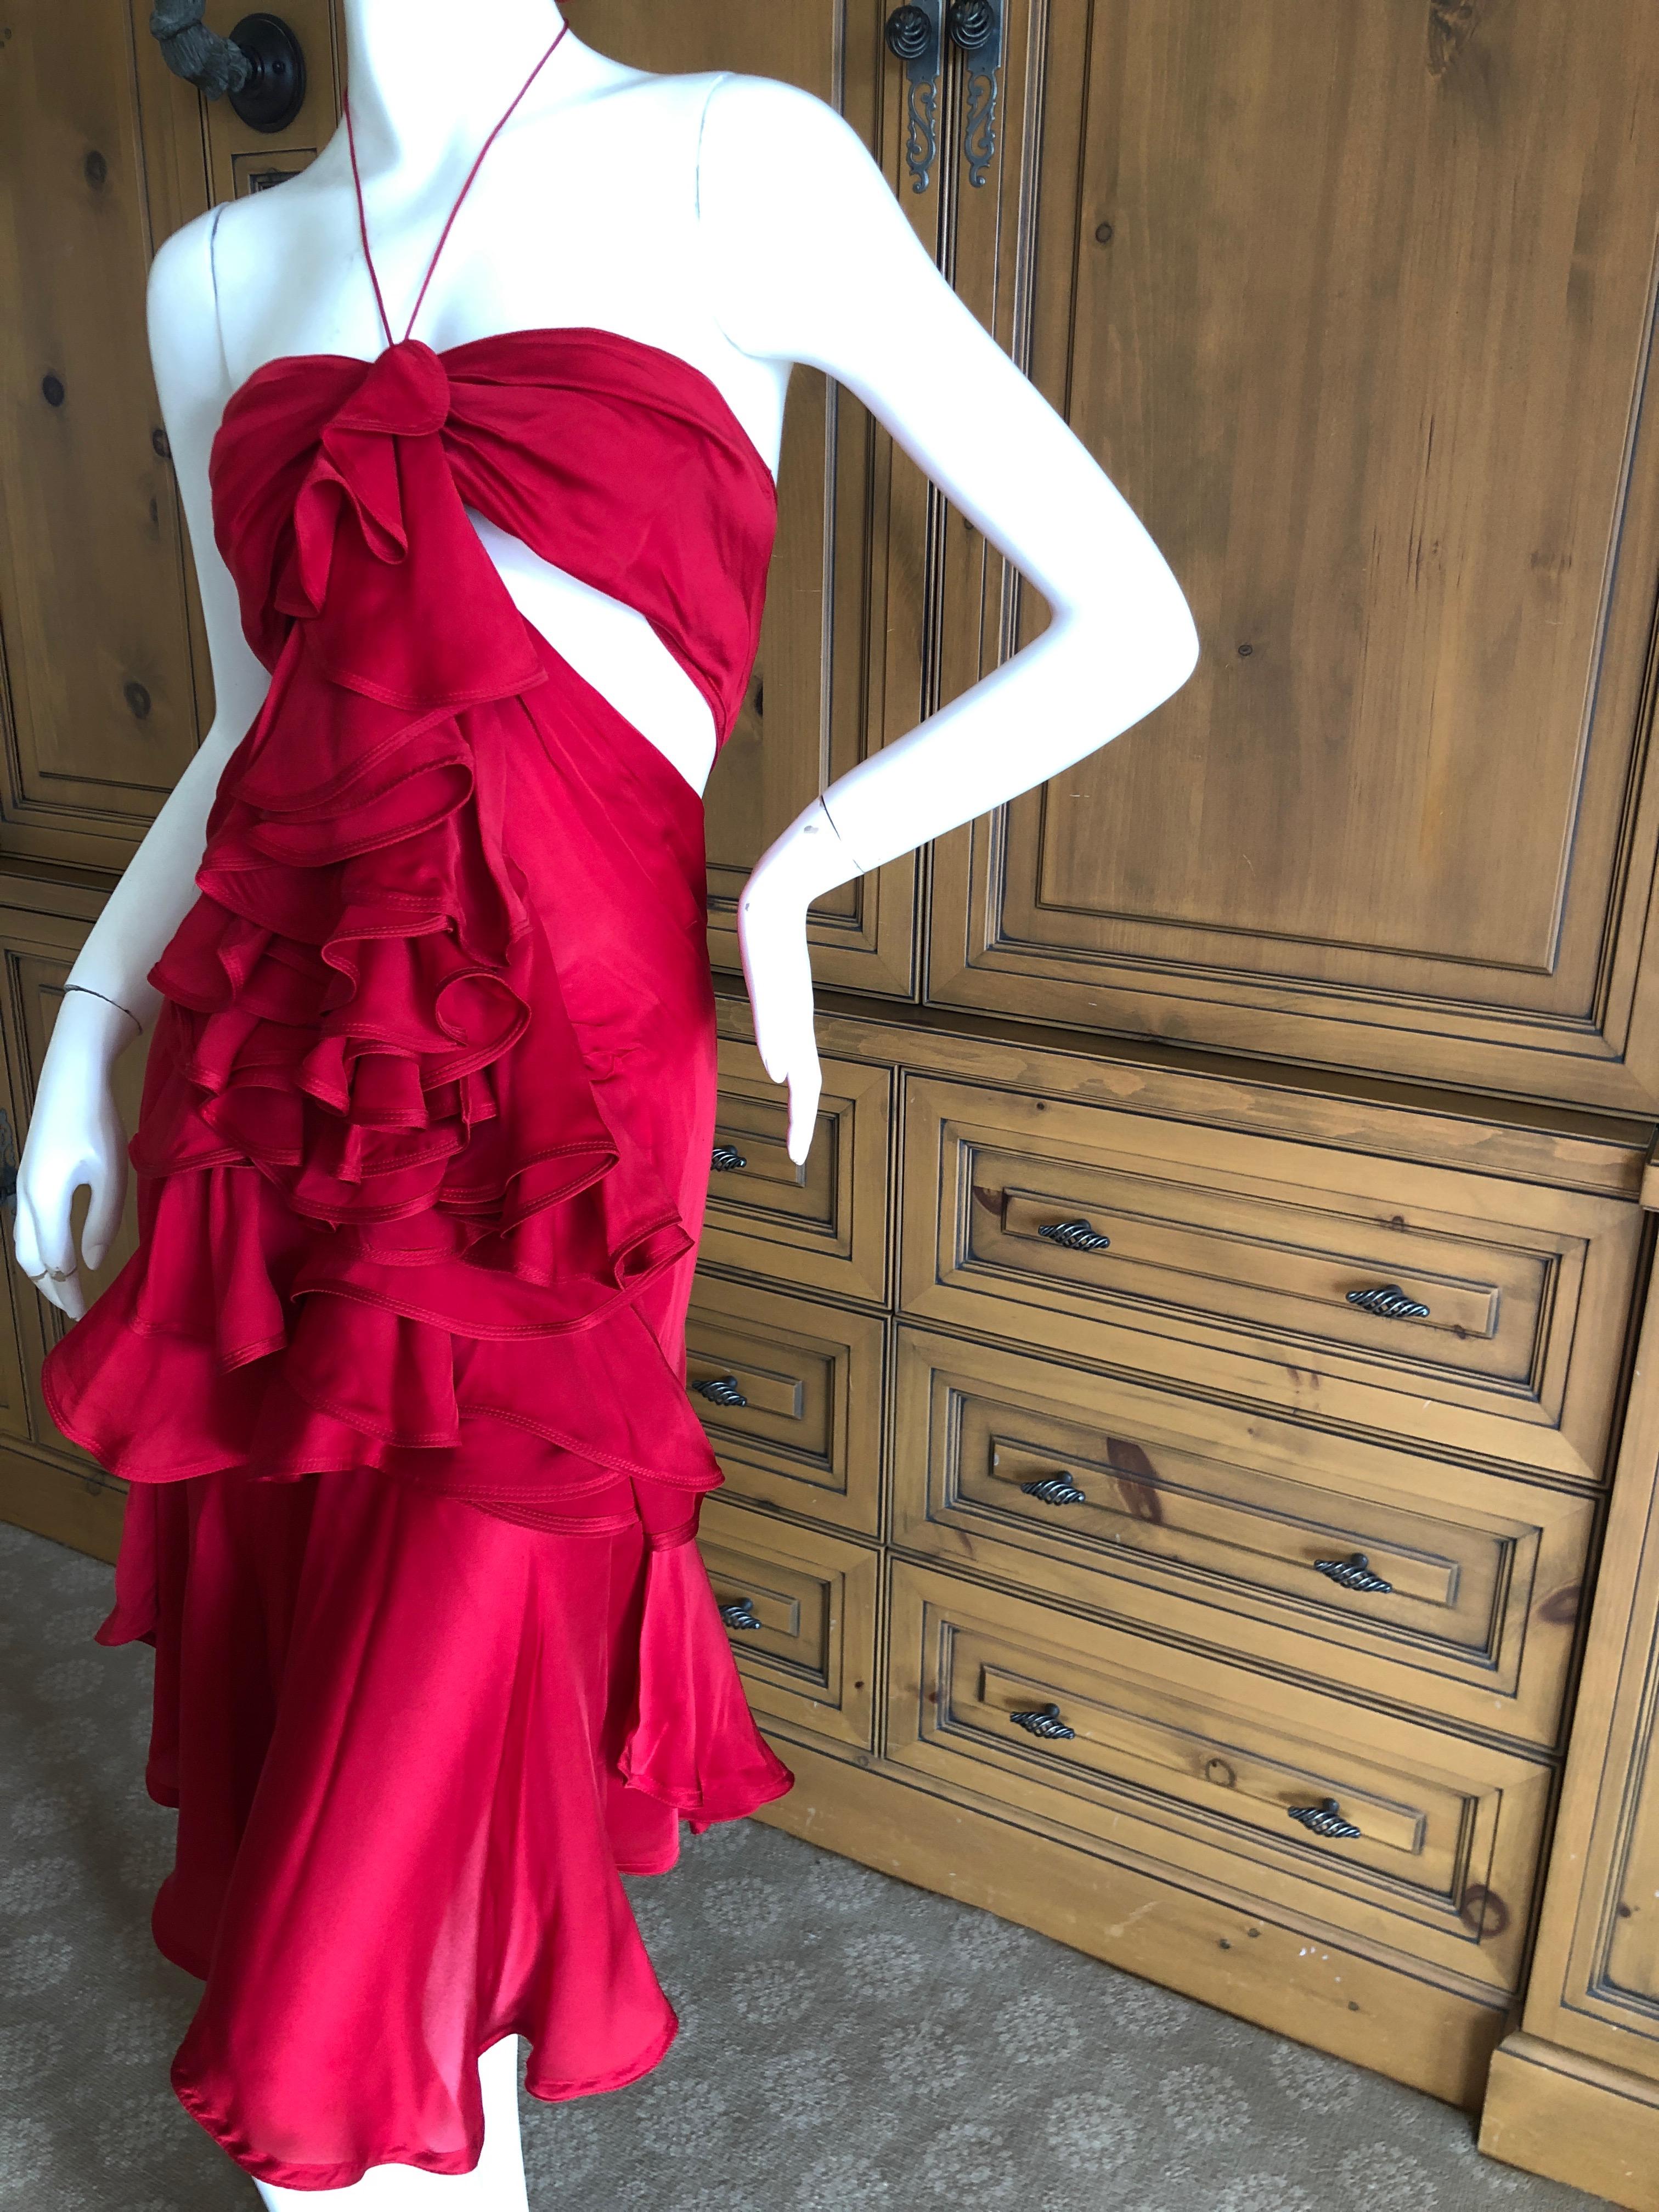 Yves Saint Laurent by Tom Ford 2003 Ruffled Red Silk Dress  For Sale 4